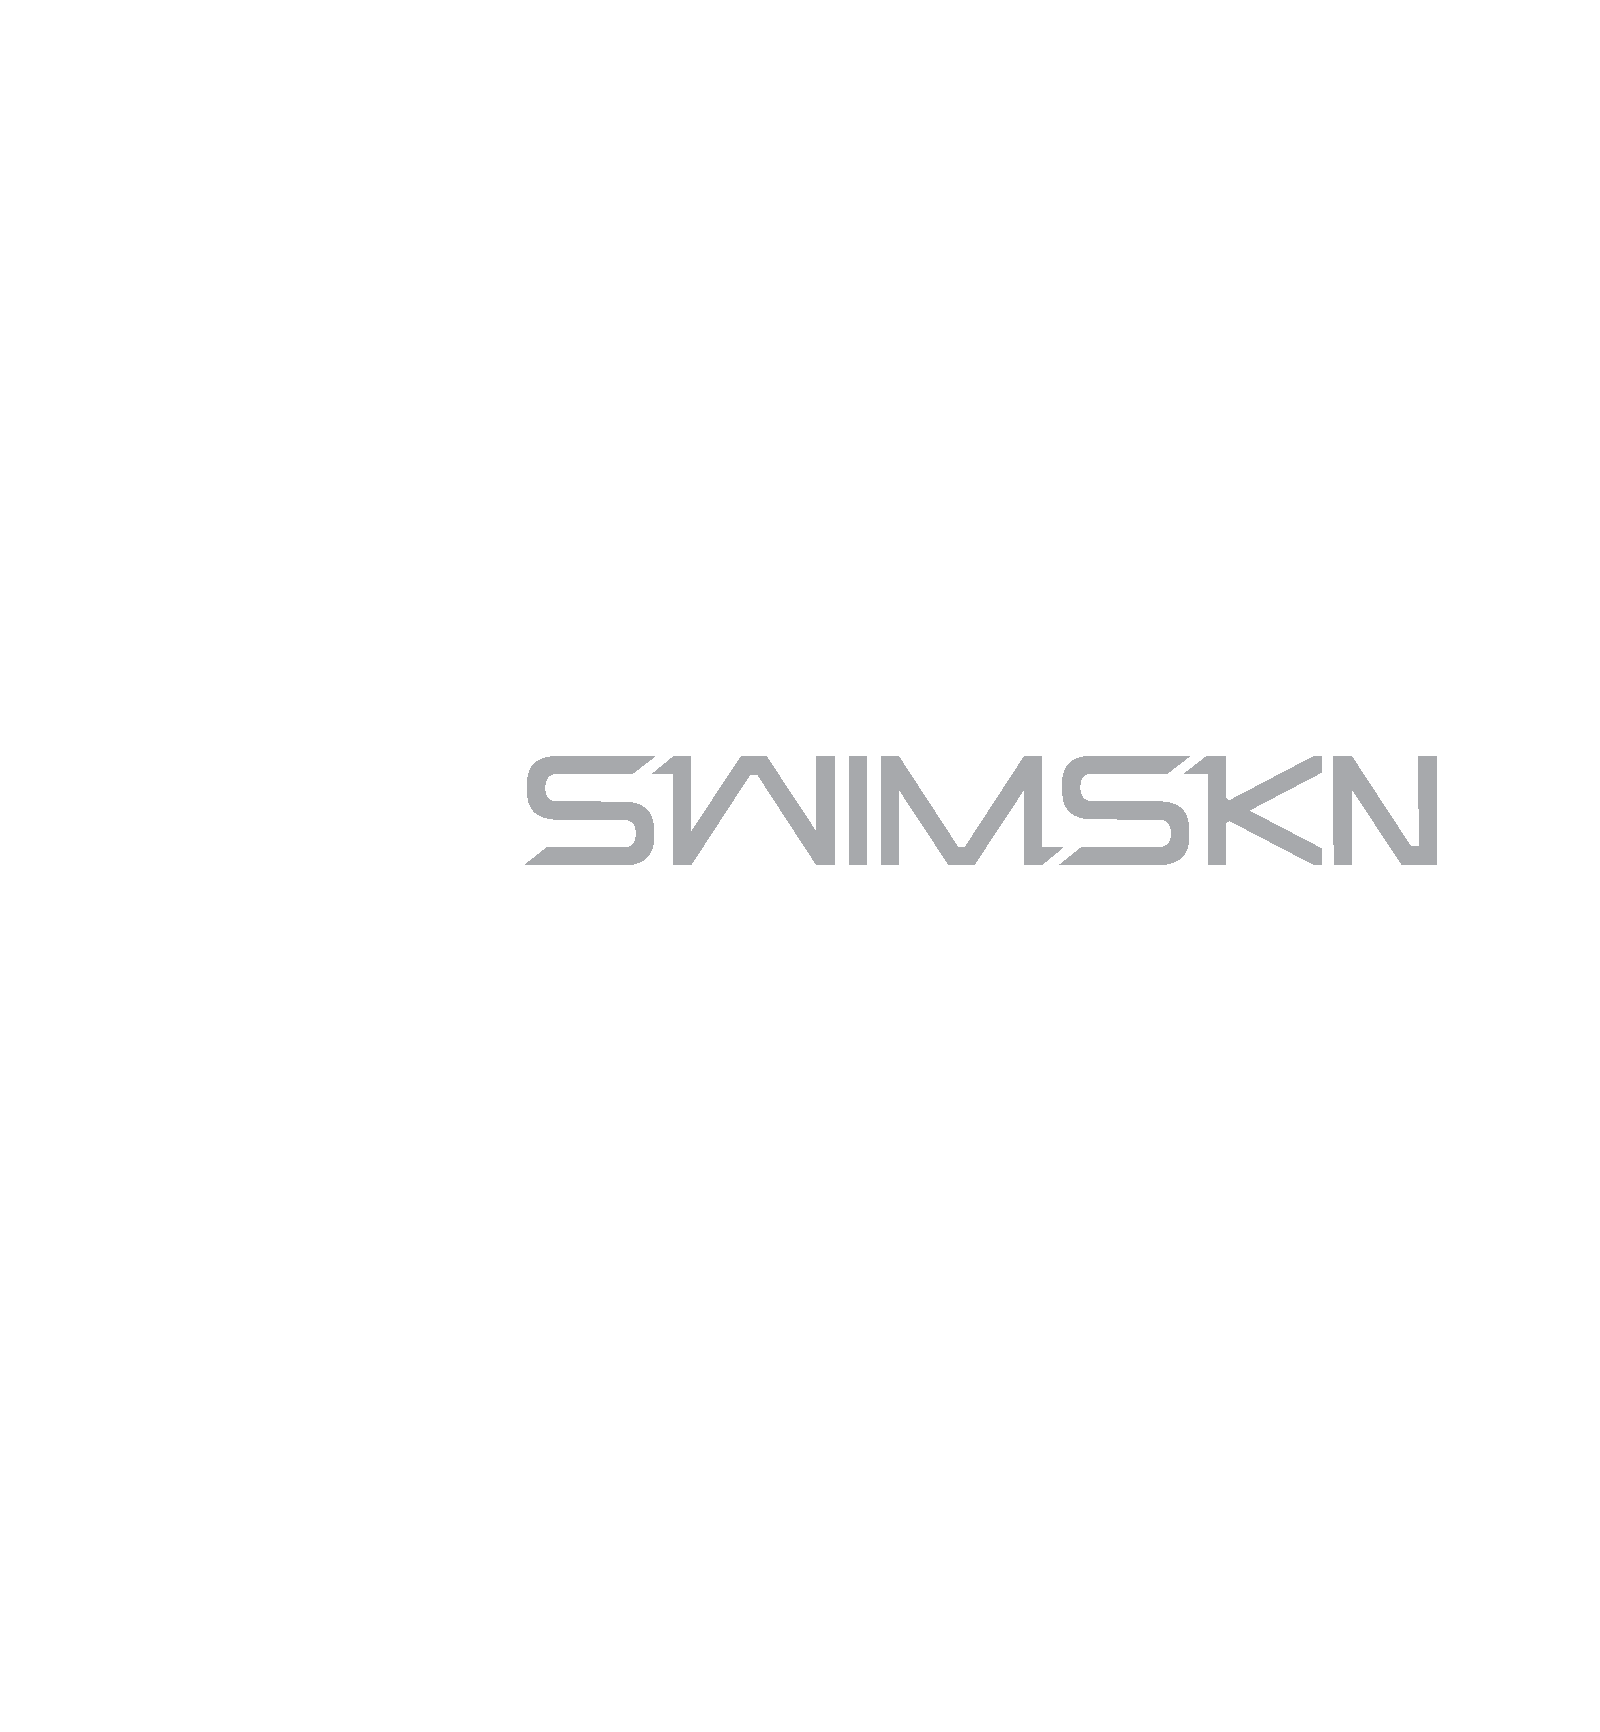 Robertstown-Orca-Racesuits-RS1-Swmskn-Logo-1